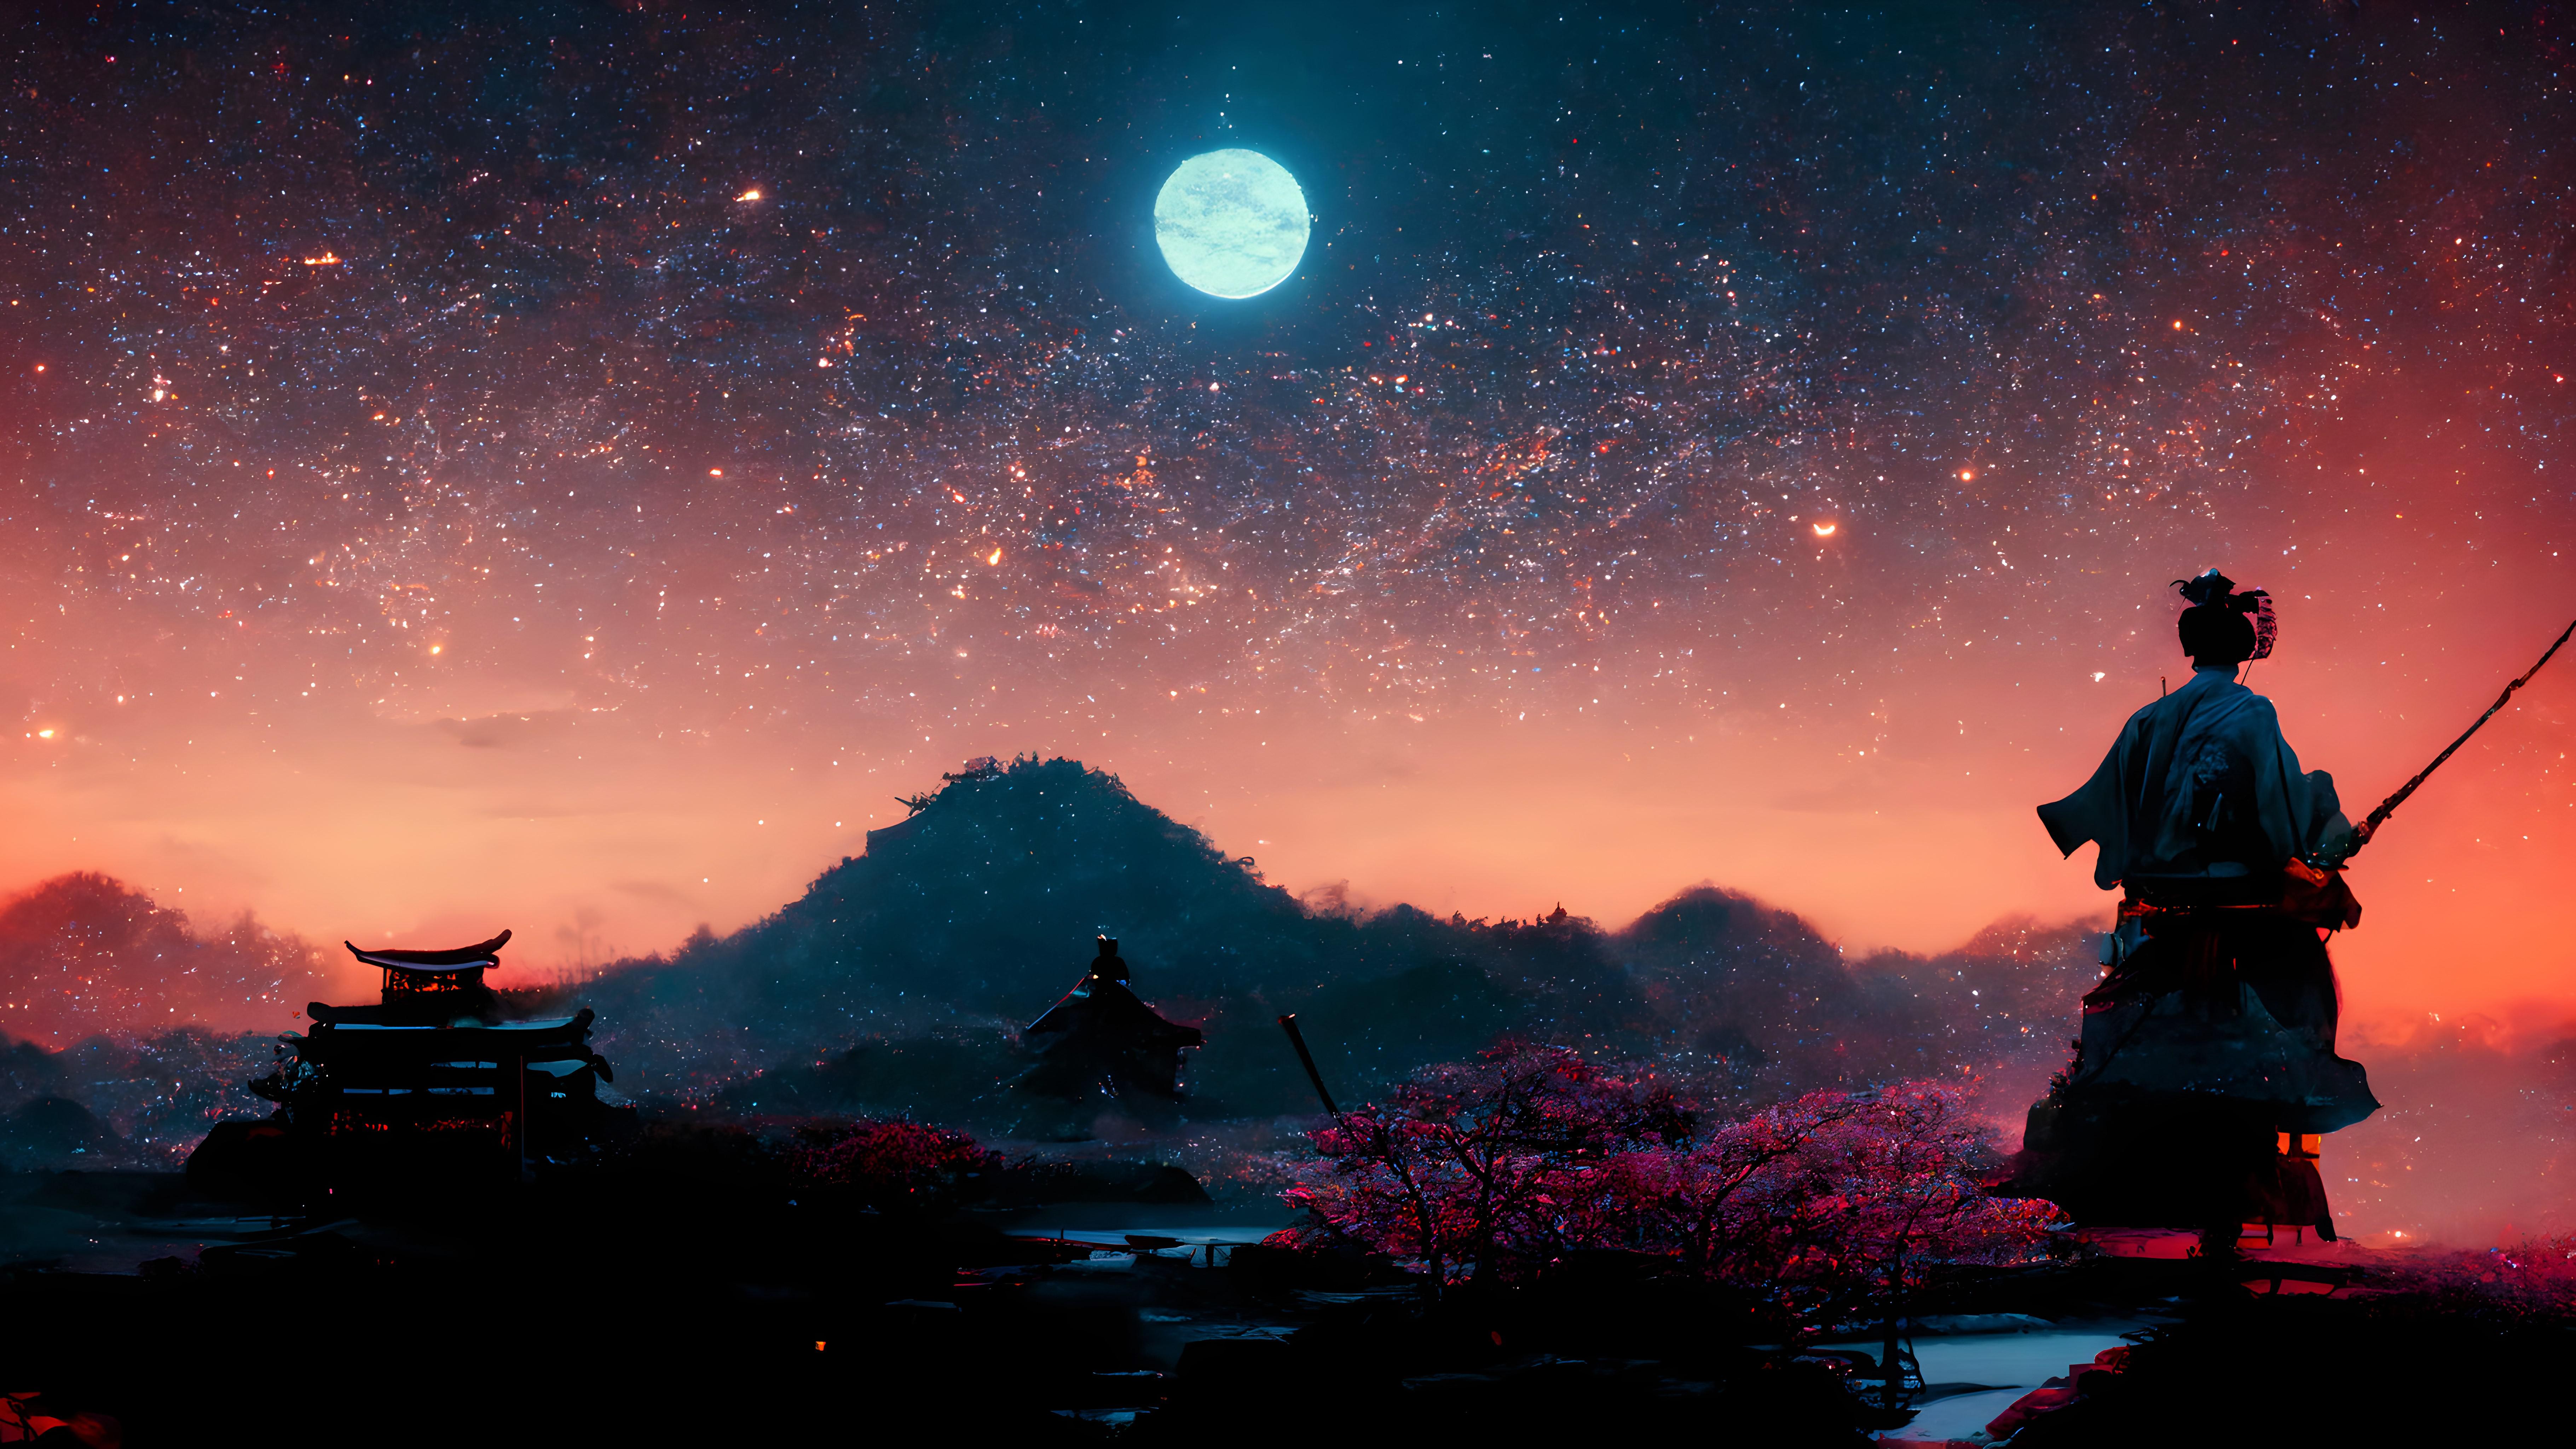 Samurai 4K wallpaper for your desktop or mobile screen free and easy to download